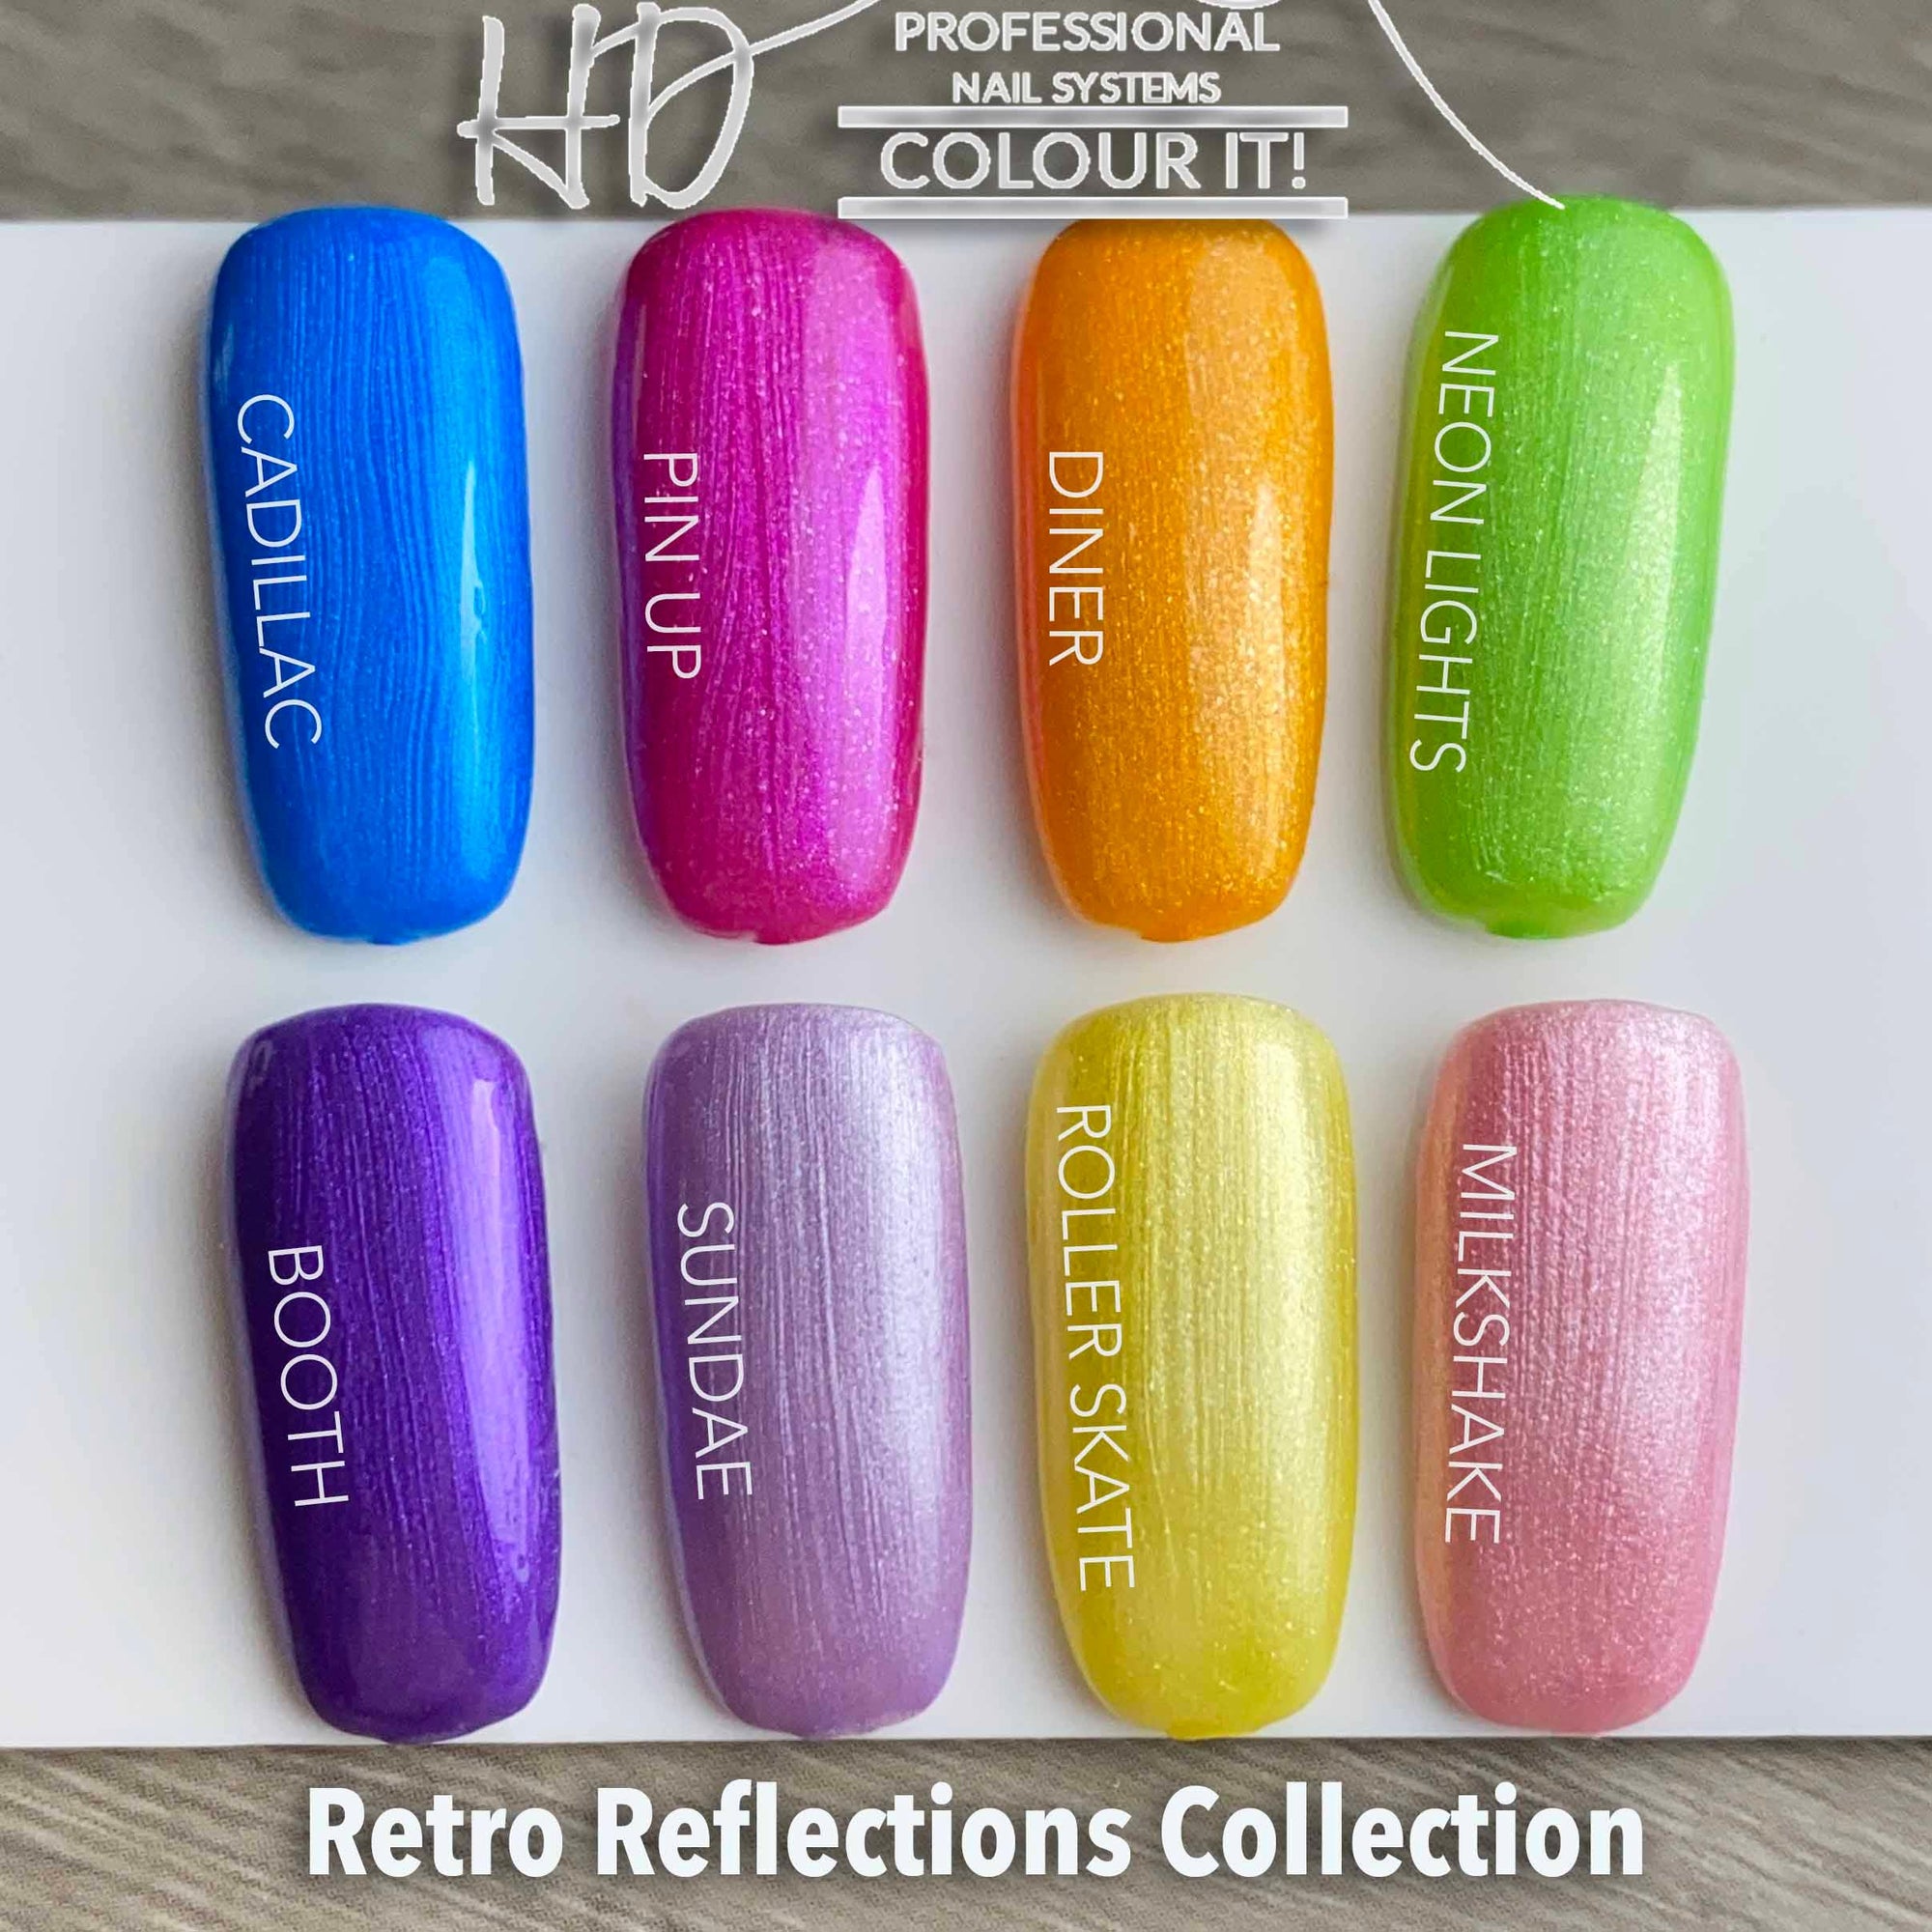 HD Colour It! Retro Reflections Collection (all 8 colors 15ml) - Gel Essentialz